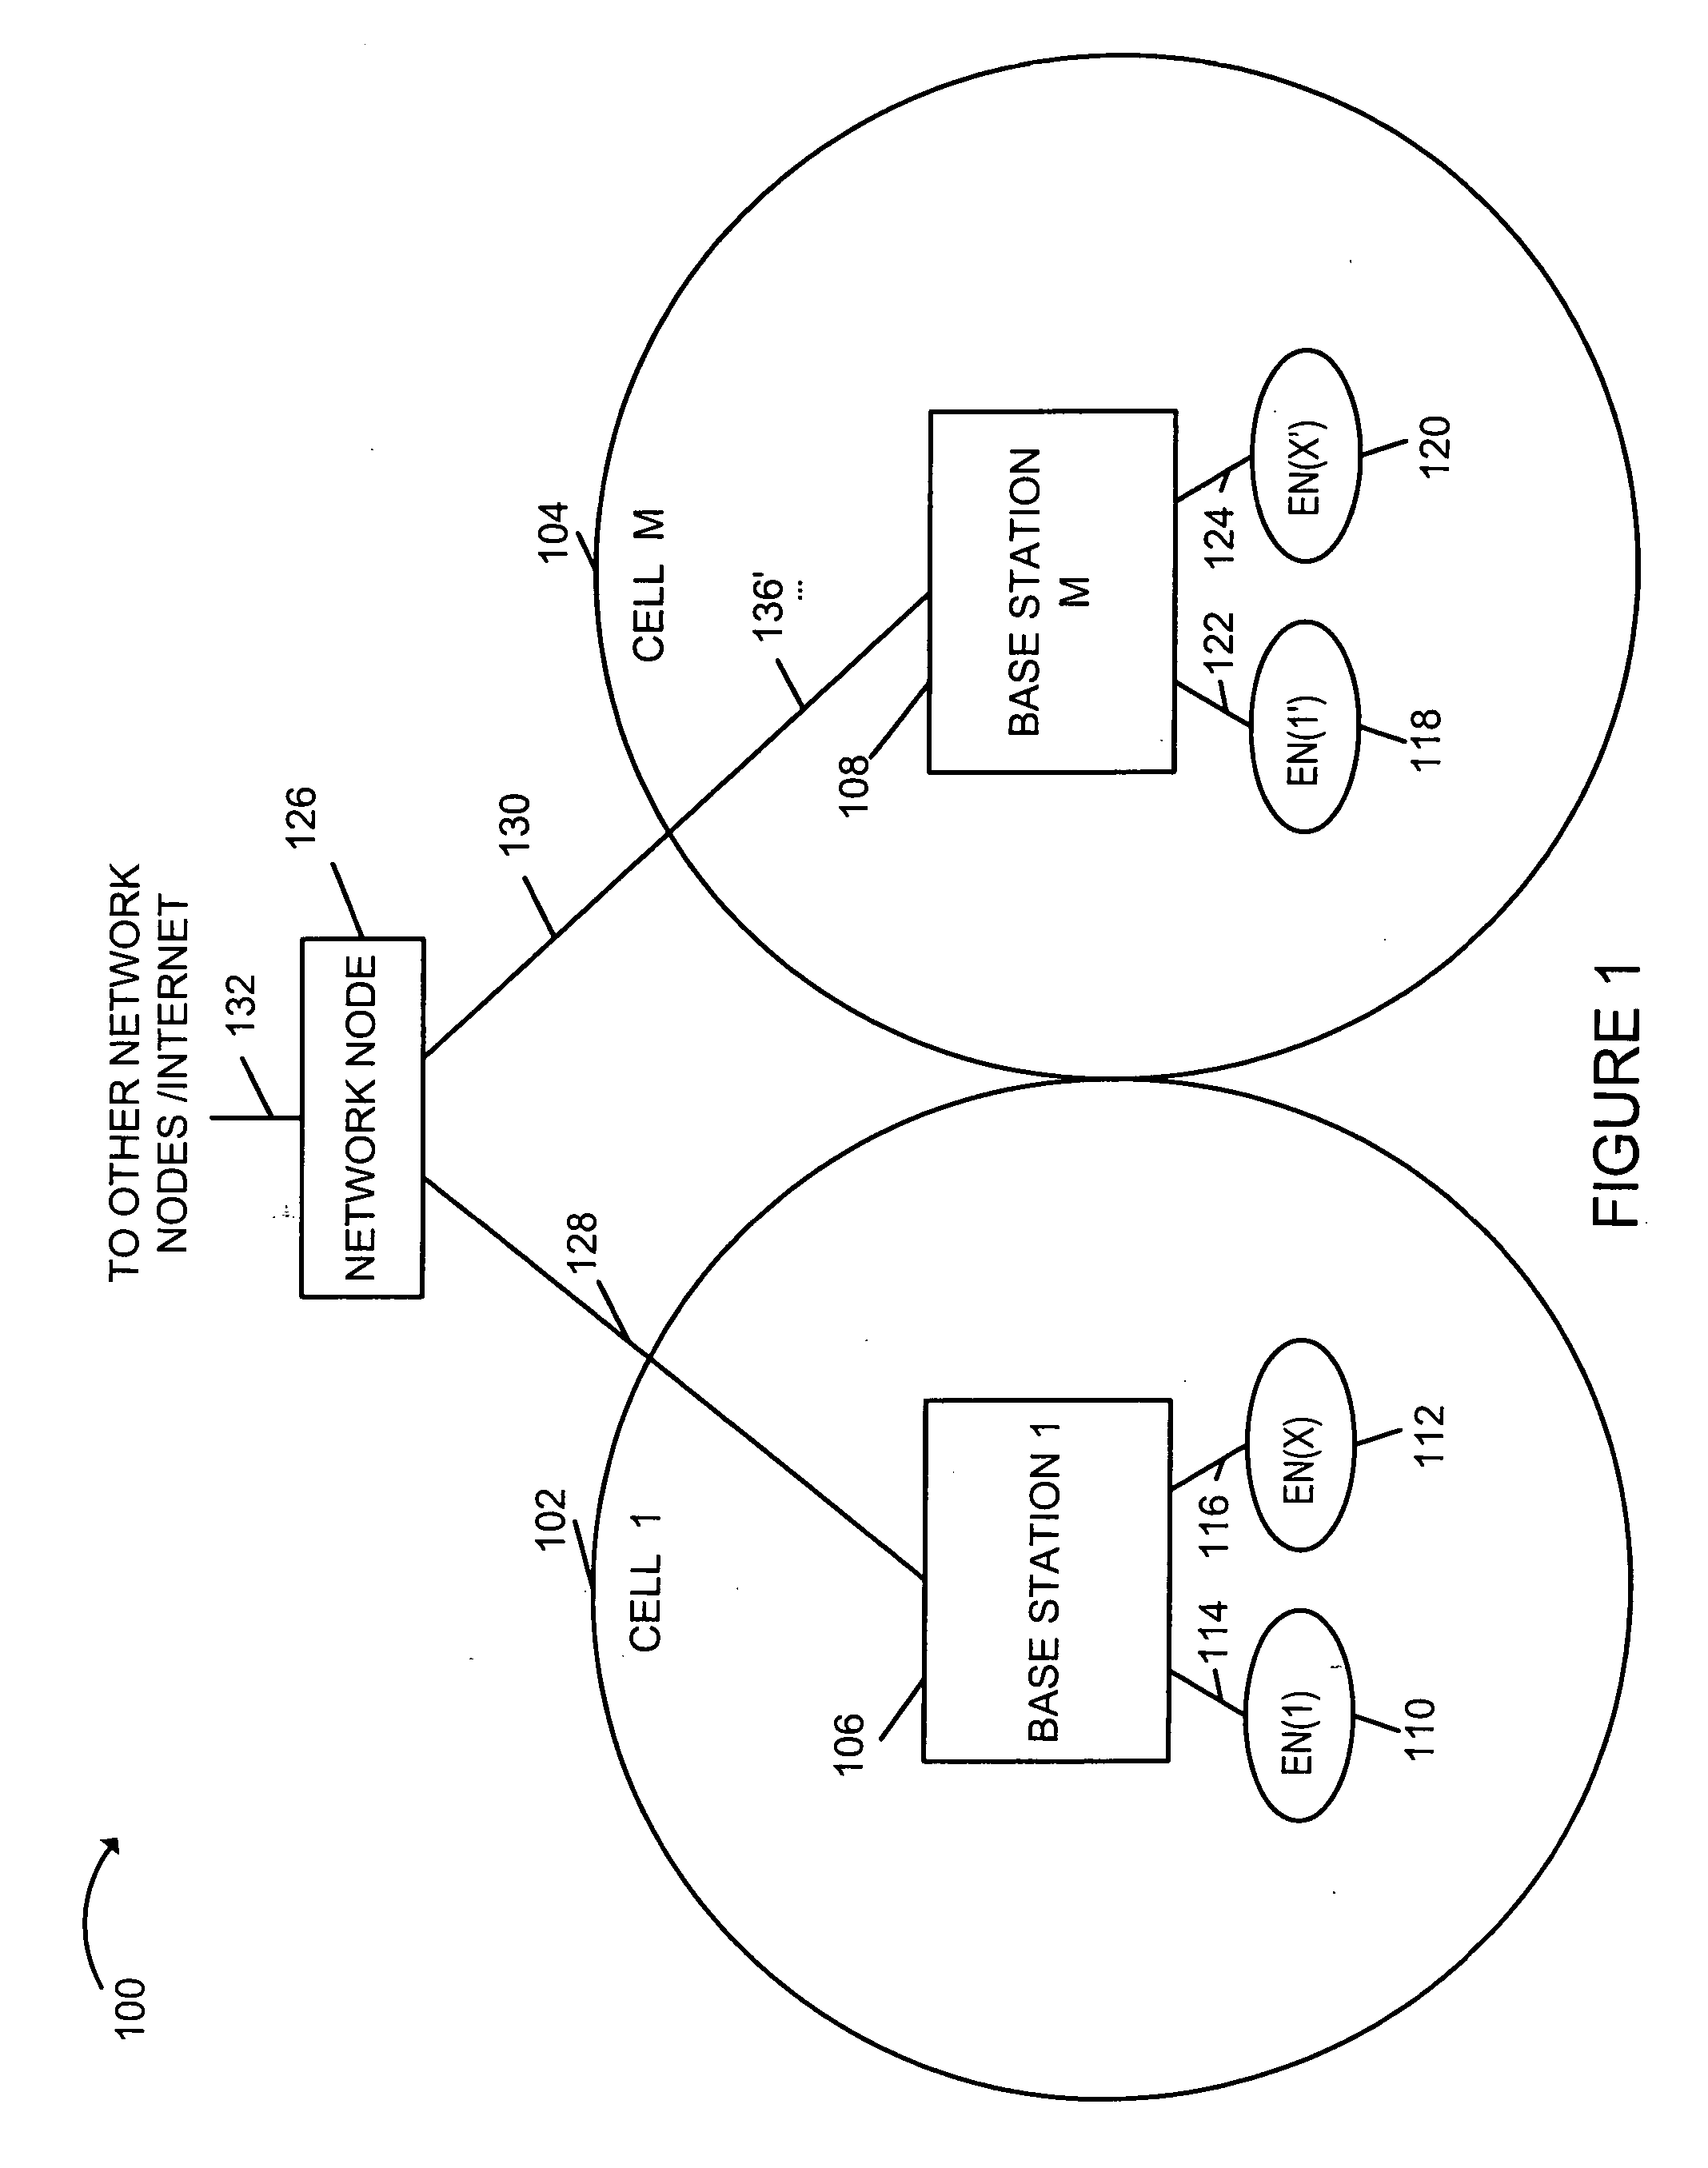 Efficient paging in a wireless communication system